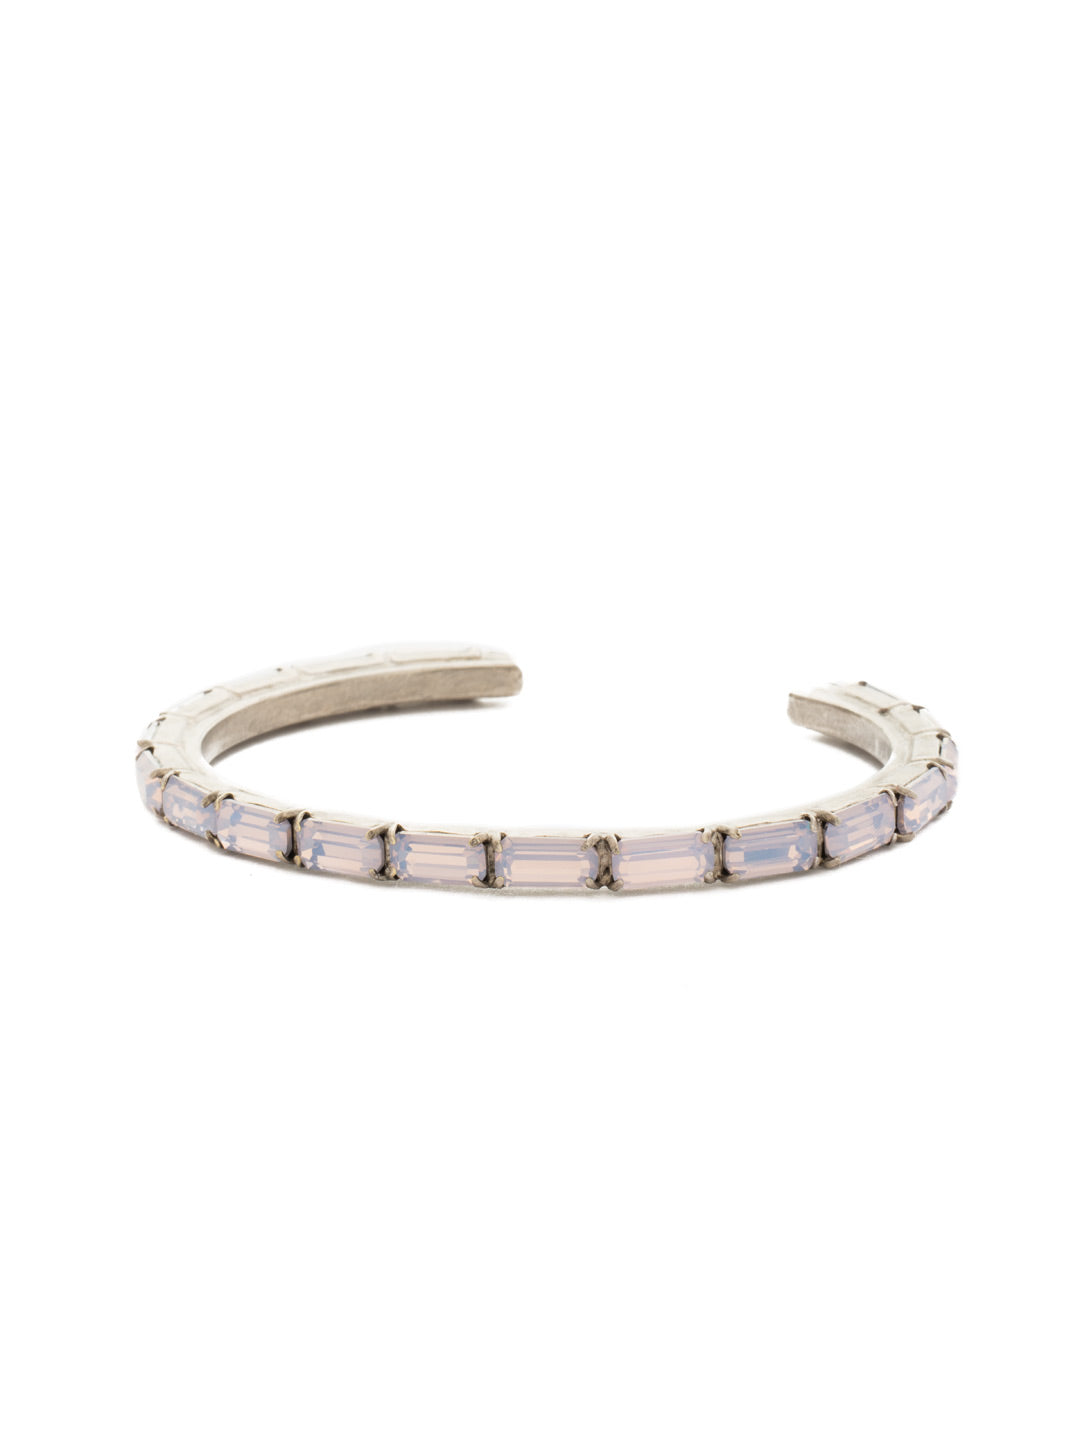 Brilliant Baguette Cuff Bracelet - BDK49ASROW - <p>This cuff bracelet features repeating crystal baguettes and can be mixed and matched in a myriad of ways. From Sorrelli's Rose Water collection in our Antique Silver-tone finish.</p>